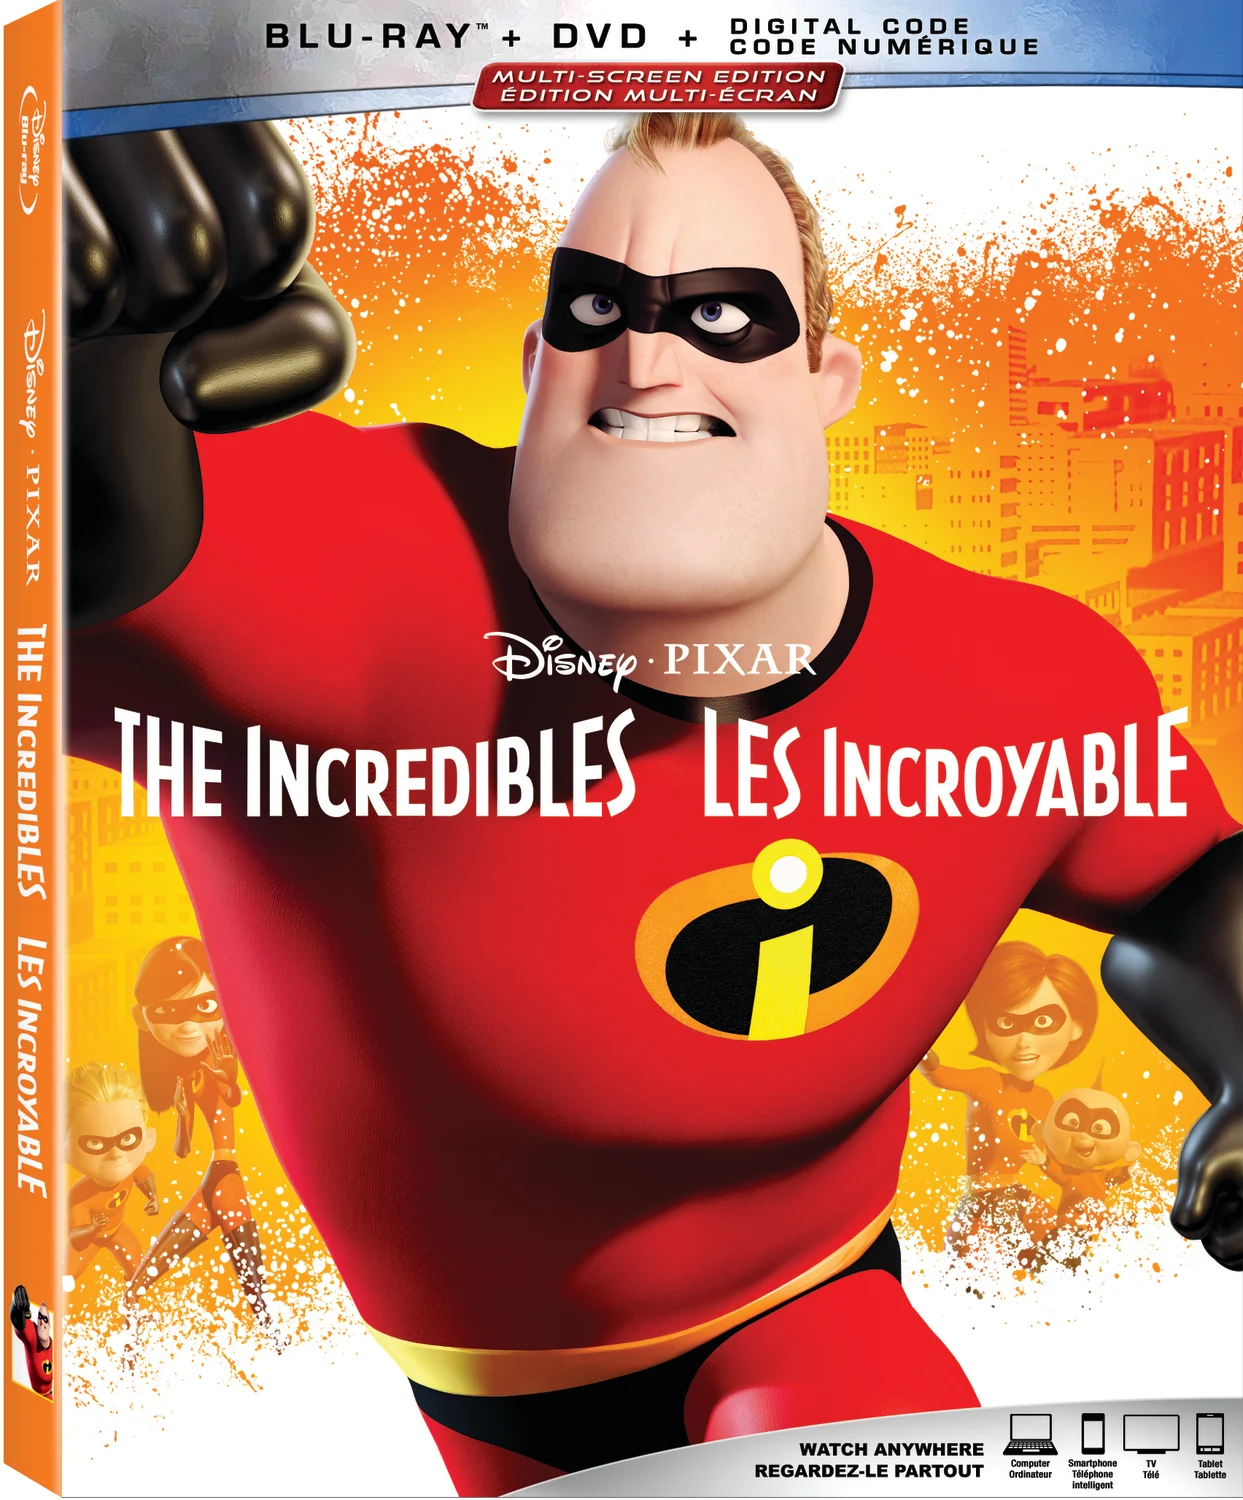 Incredibles, The (2019 re-issue) (Blu-ray/DVD Combo) on MovieShack